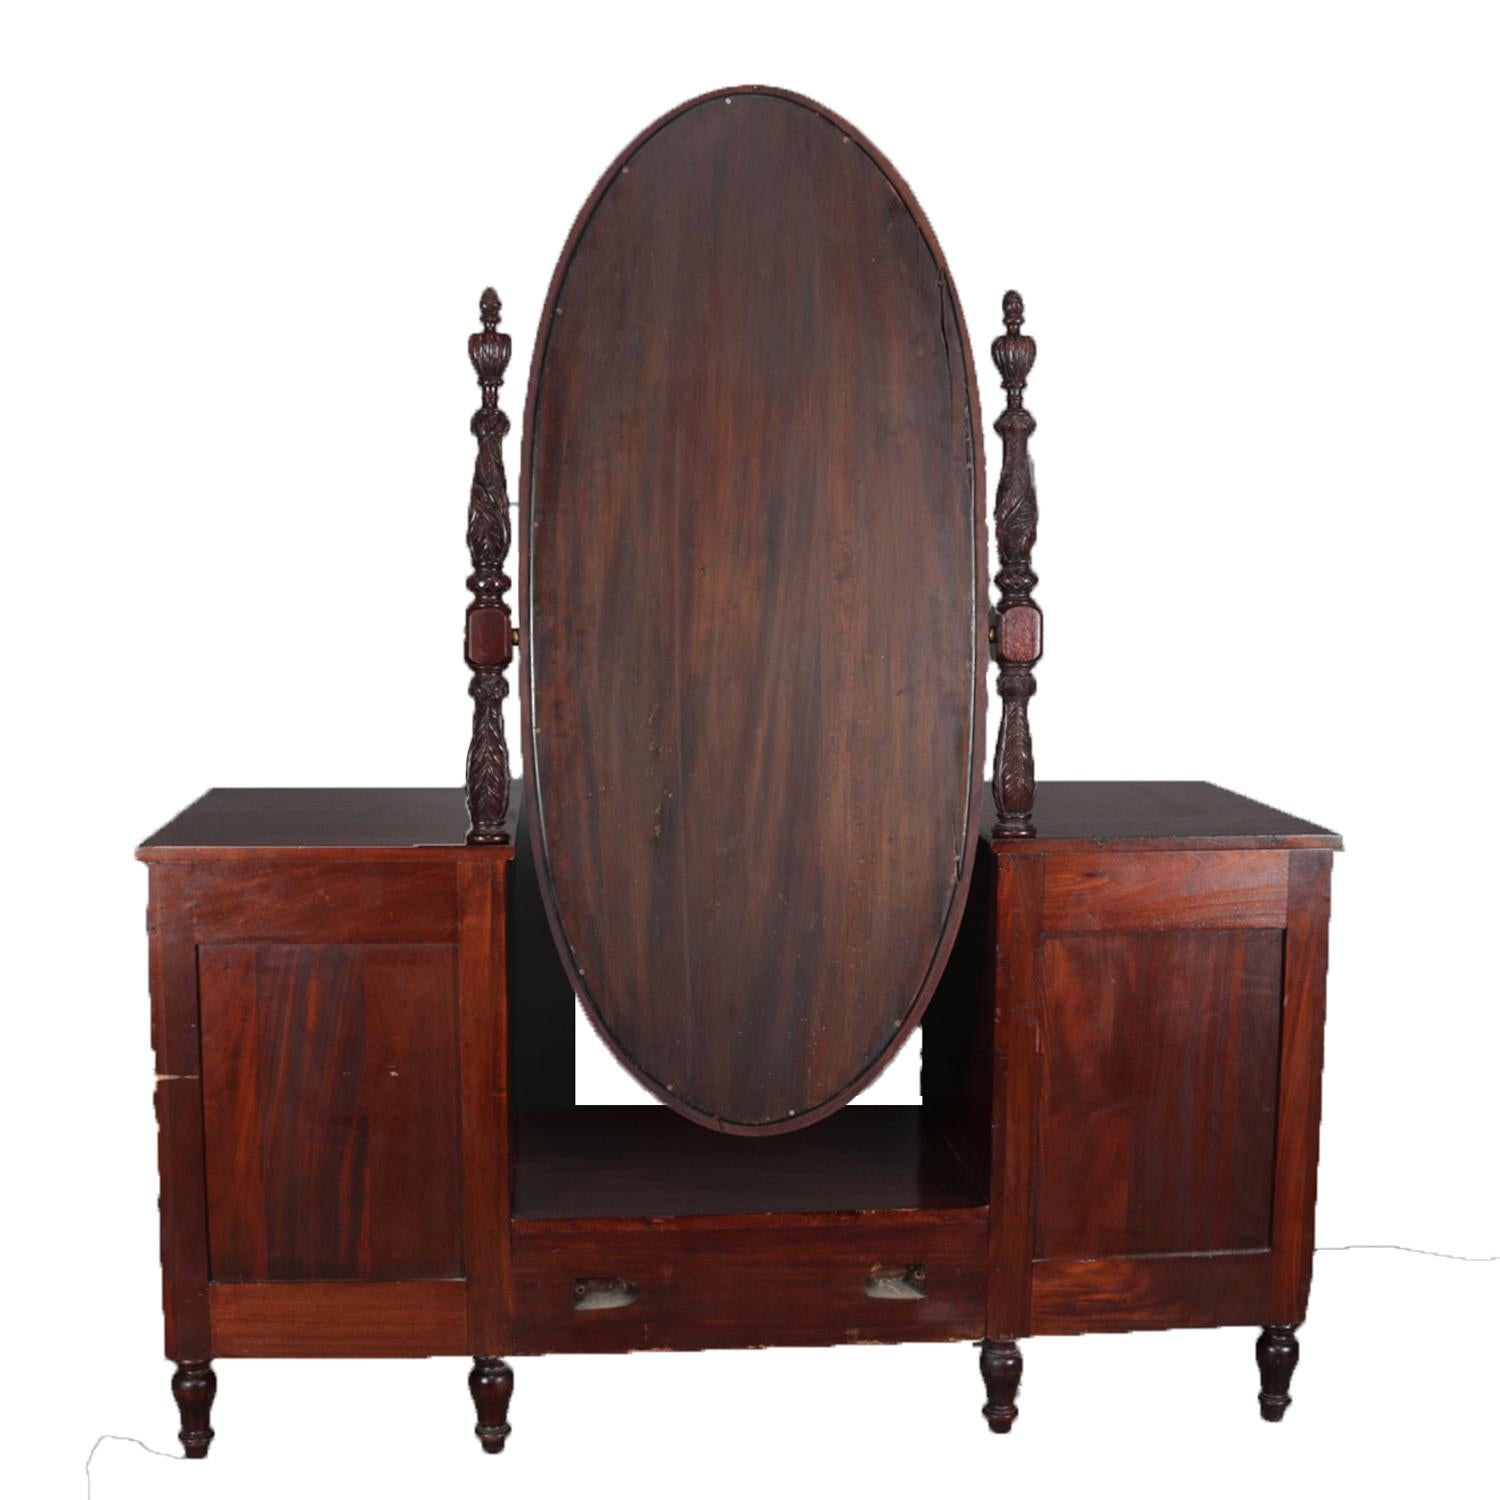 Antique American Empire dressing table feature mahogany construction with central elongated oval mirror flanked by deeply carved supports having central floral and acanthus, over central platform flanked by drawer columns each having an upper convex